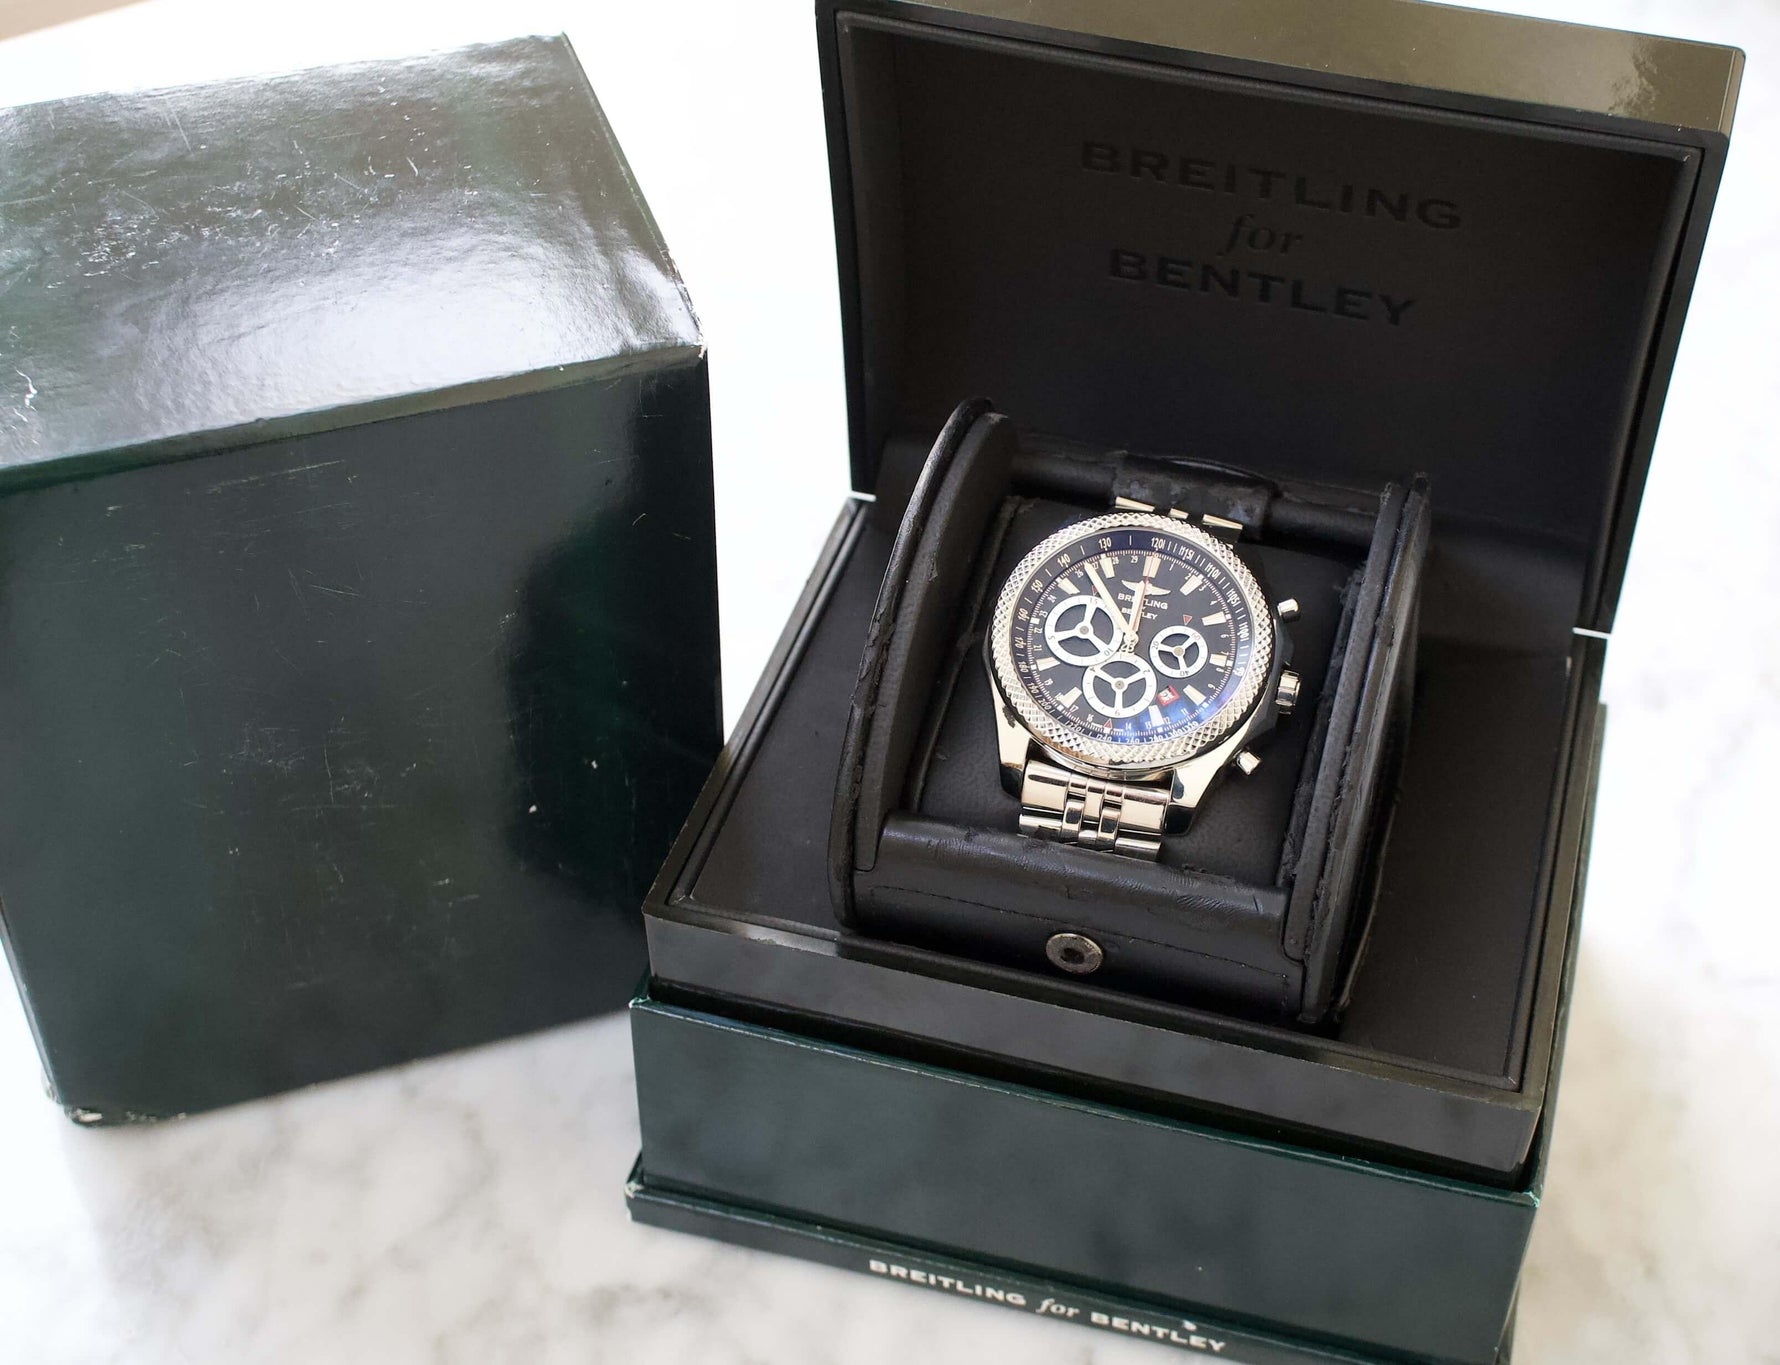 SOLD OUT: Breitling Bentley Bernato Racing A25366 Limited Edition Chronograph 49MM Box - WearingTime Luxury Watches